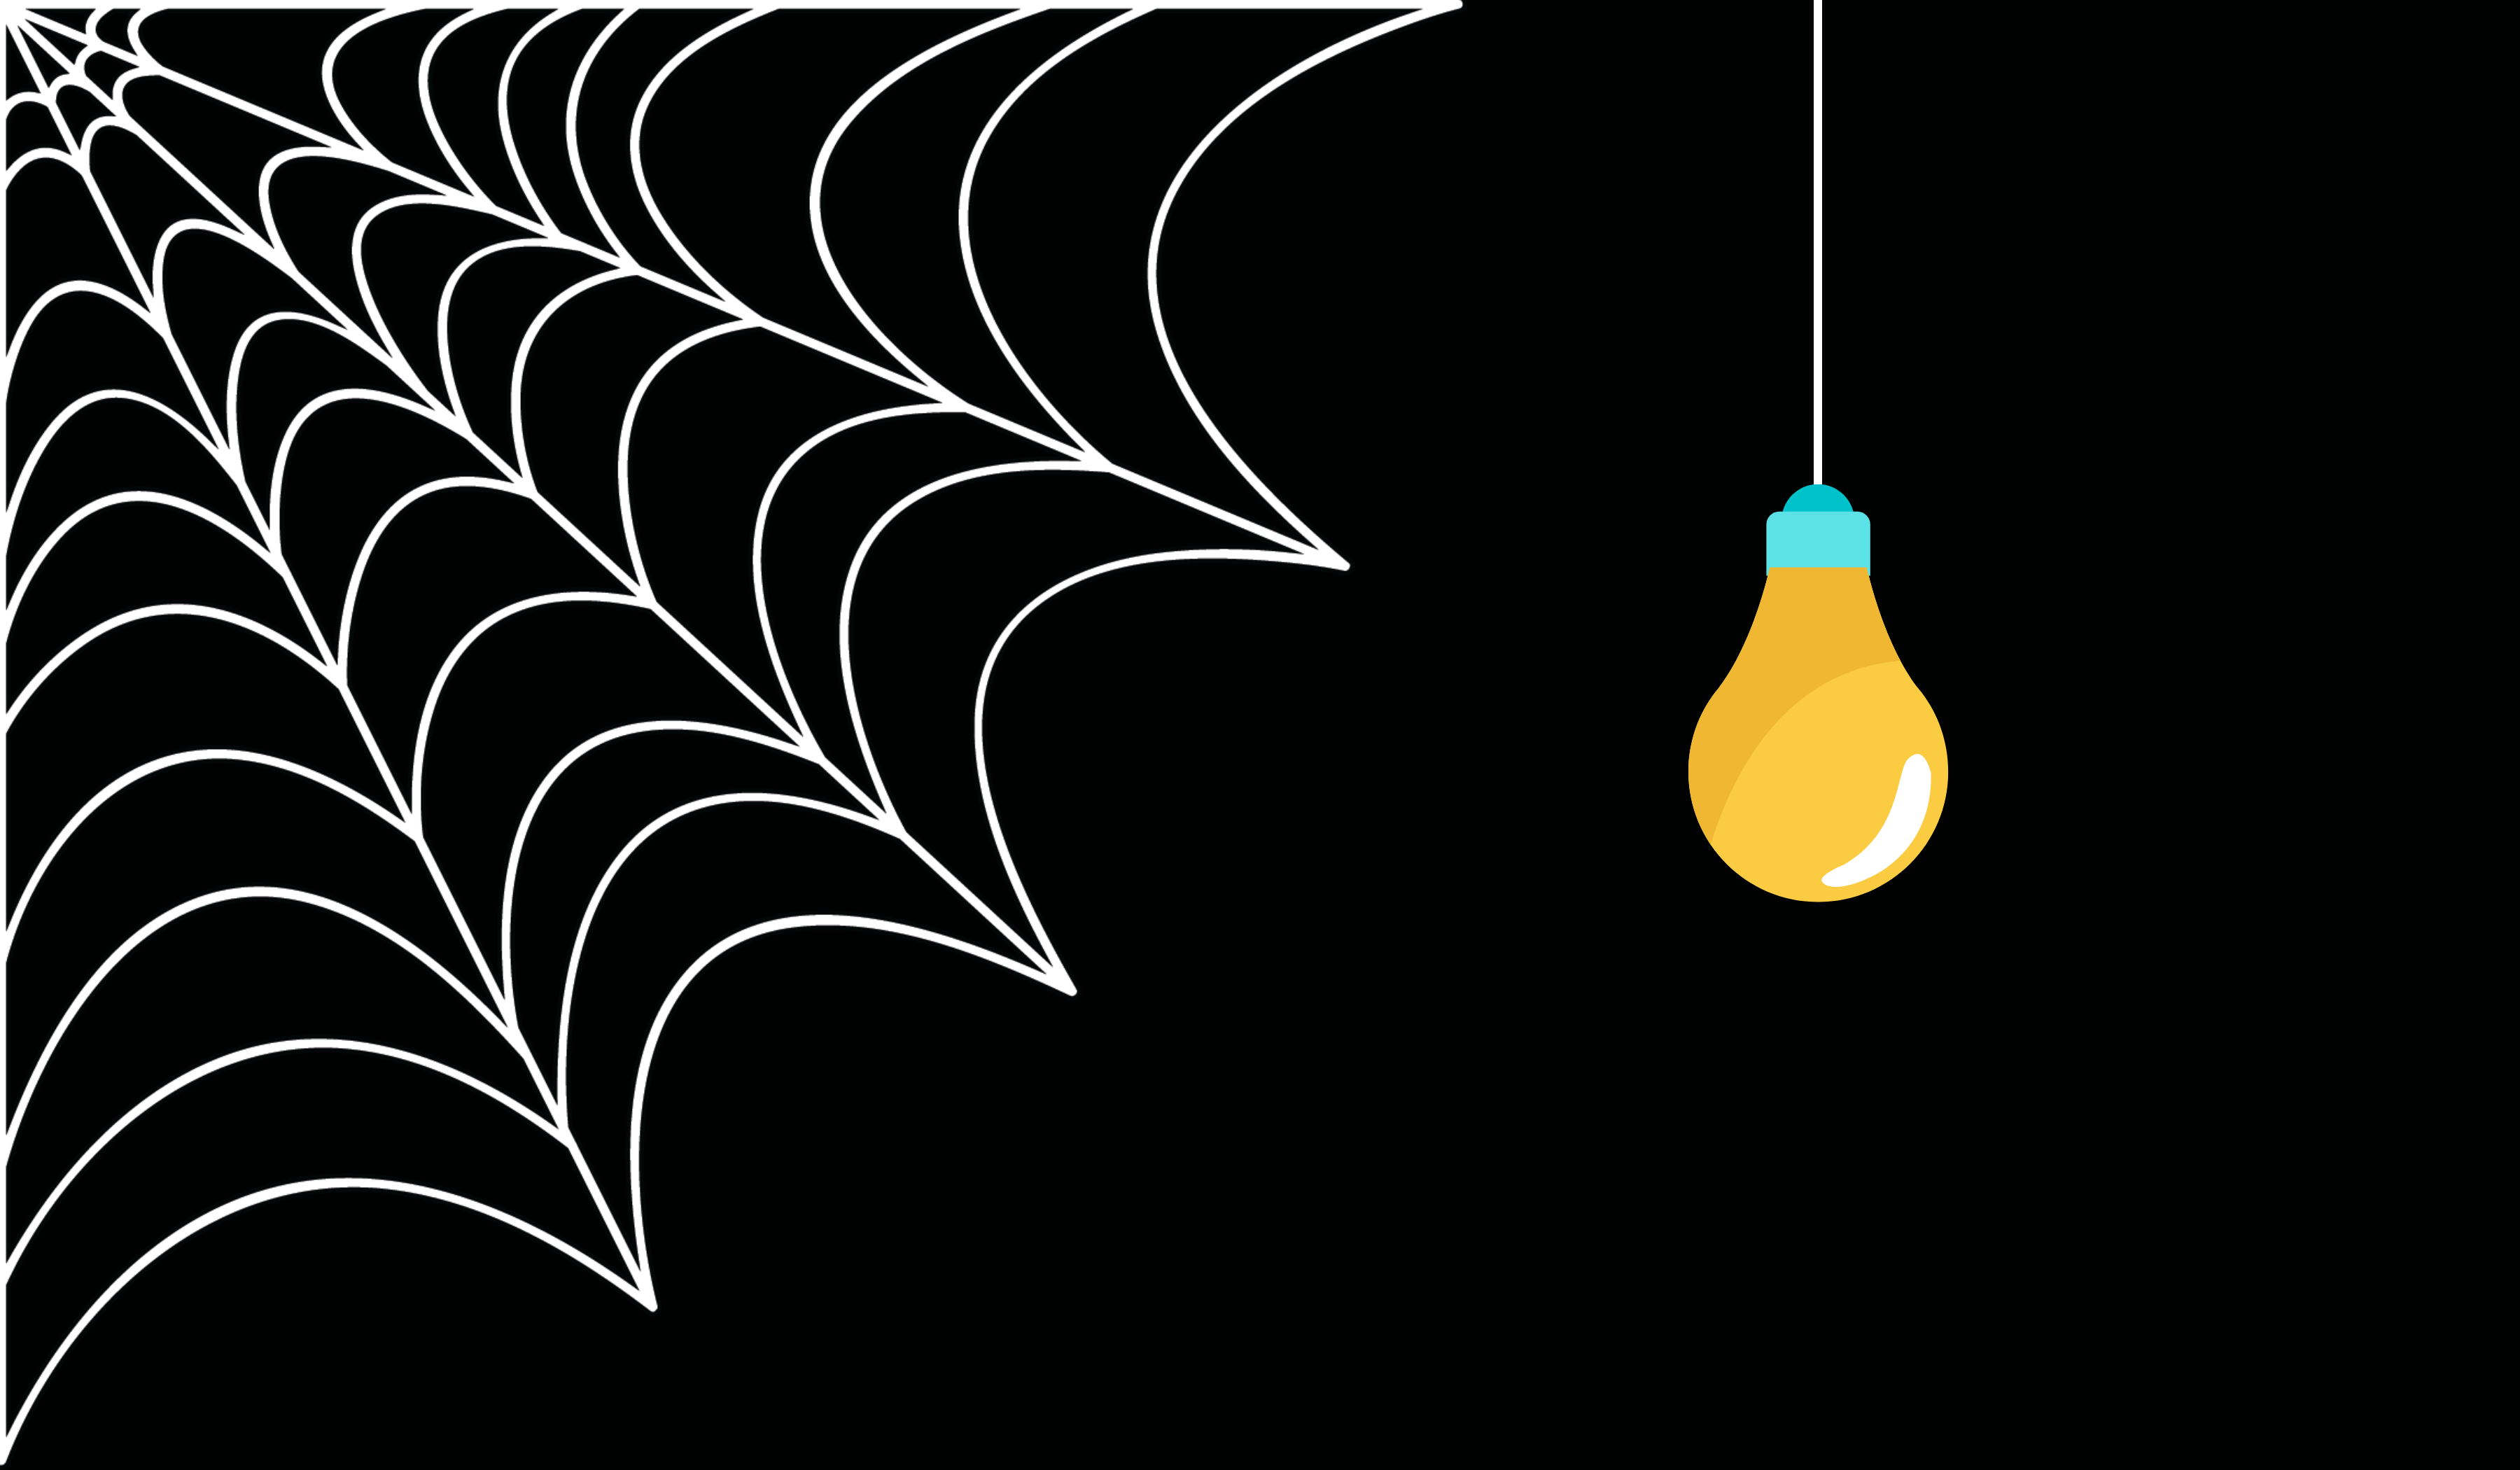 The Spider Web Effect of Thought Leadership